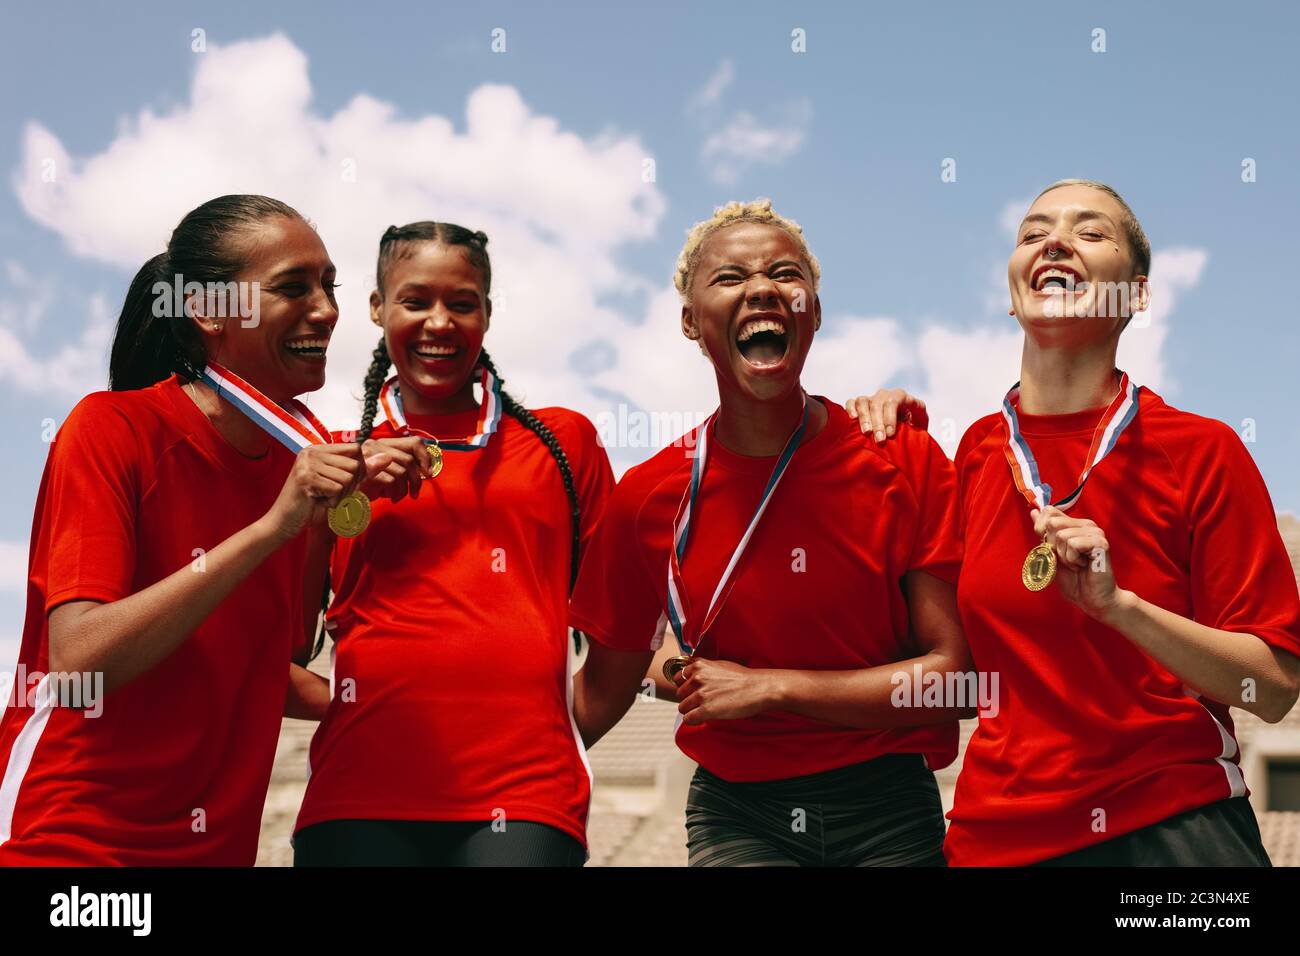 Woman football team with medals celebrating a win. Excited woman soccer team shouting in joy after winning the championship. Stock Photo